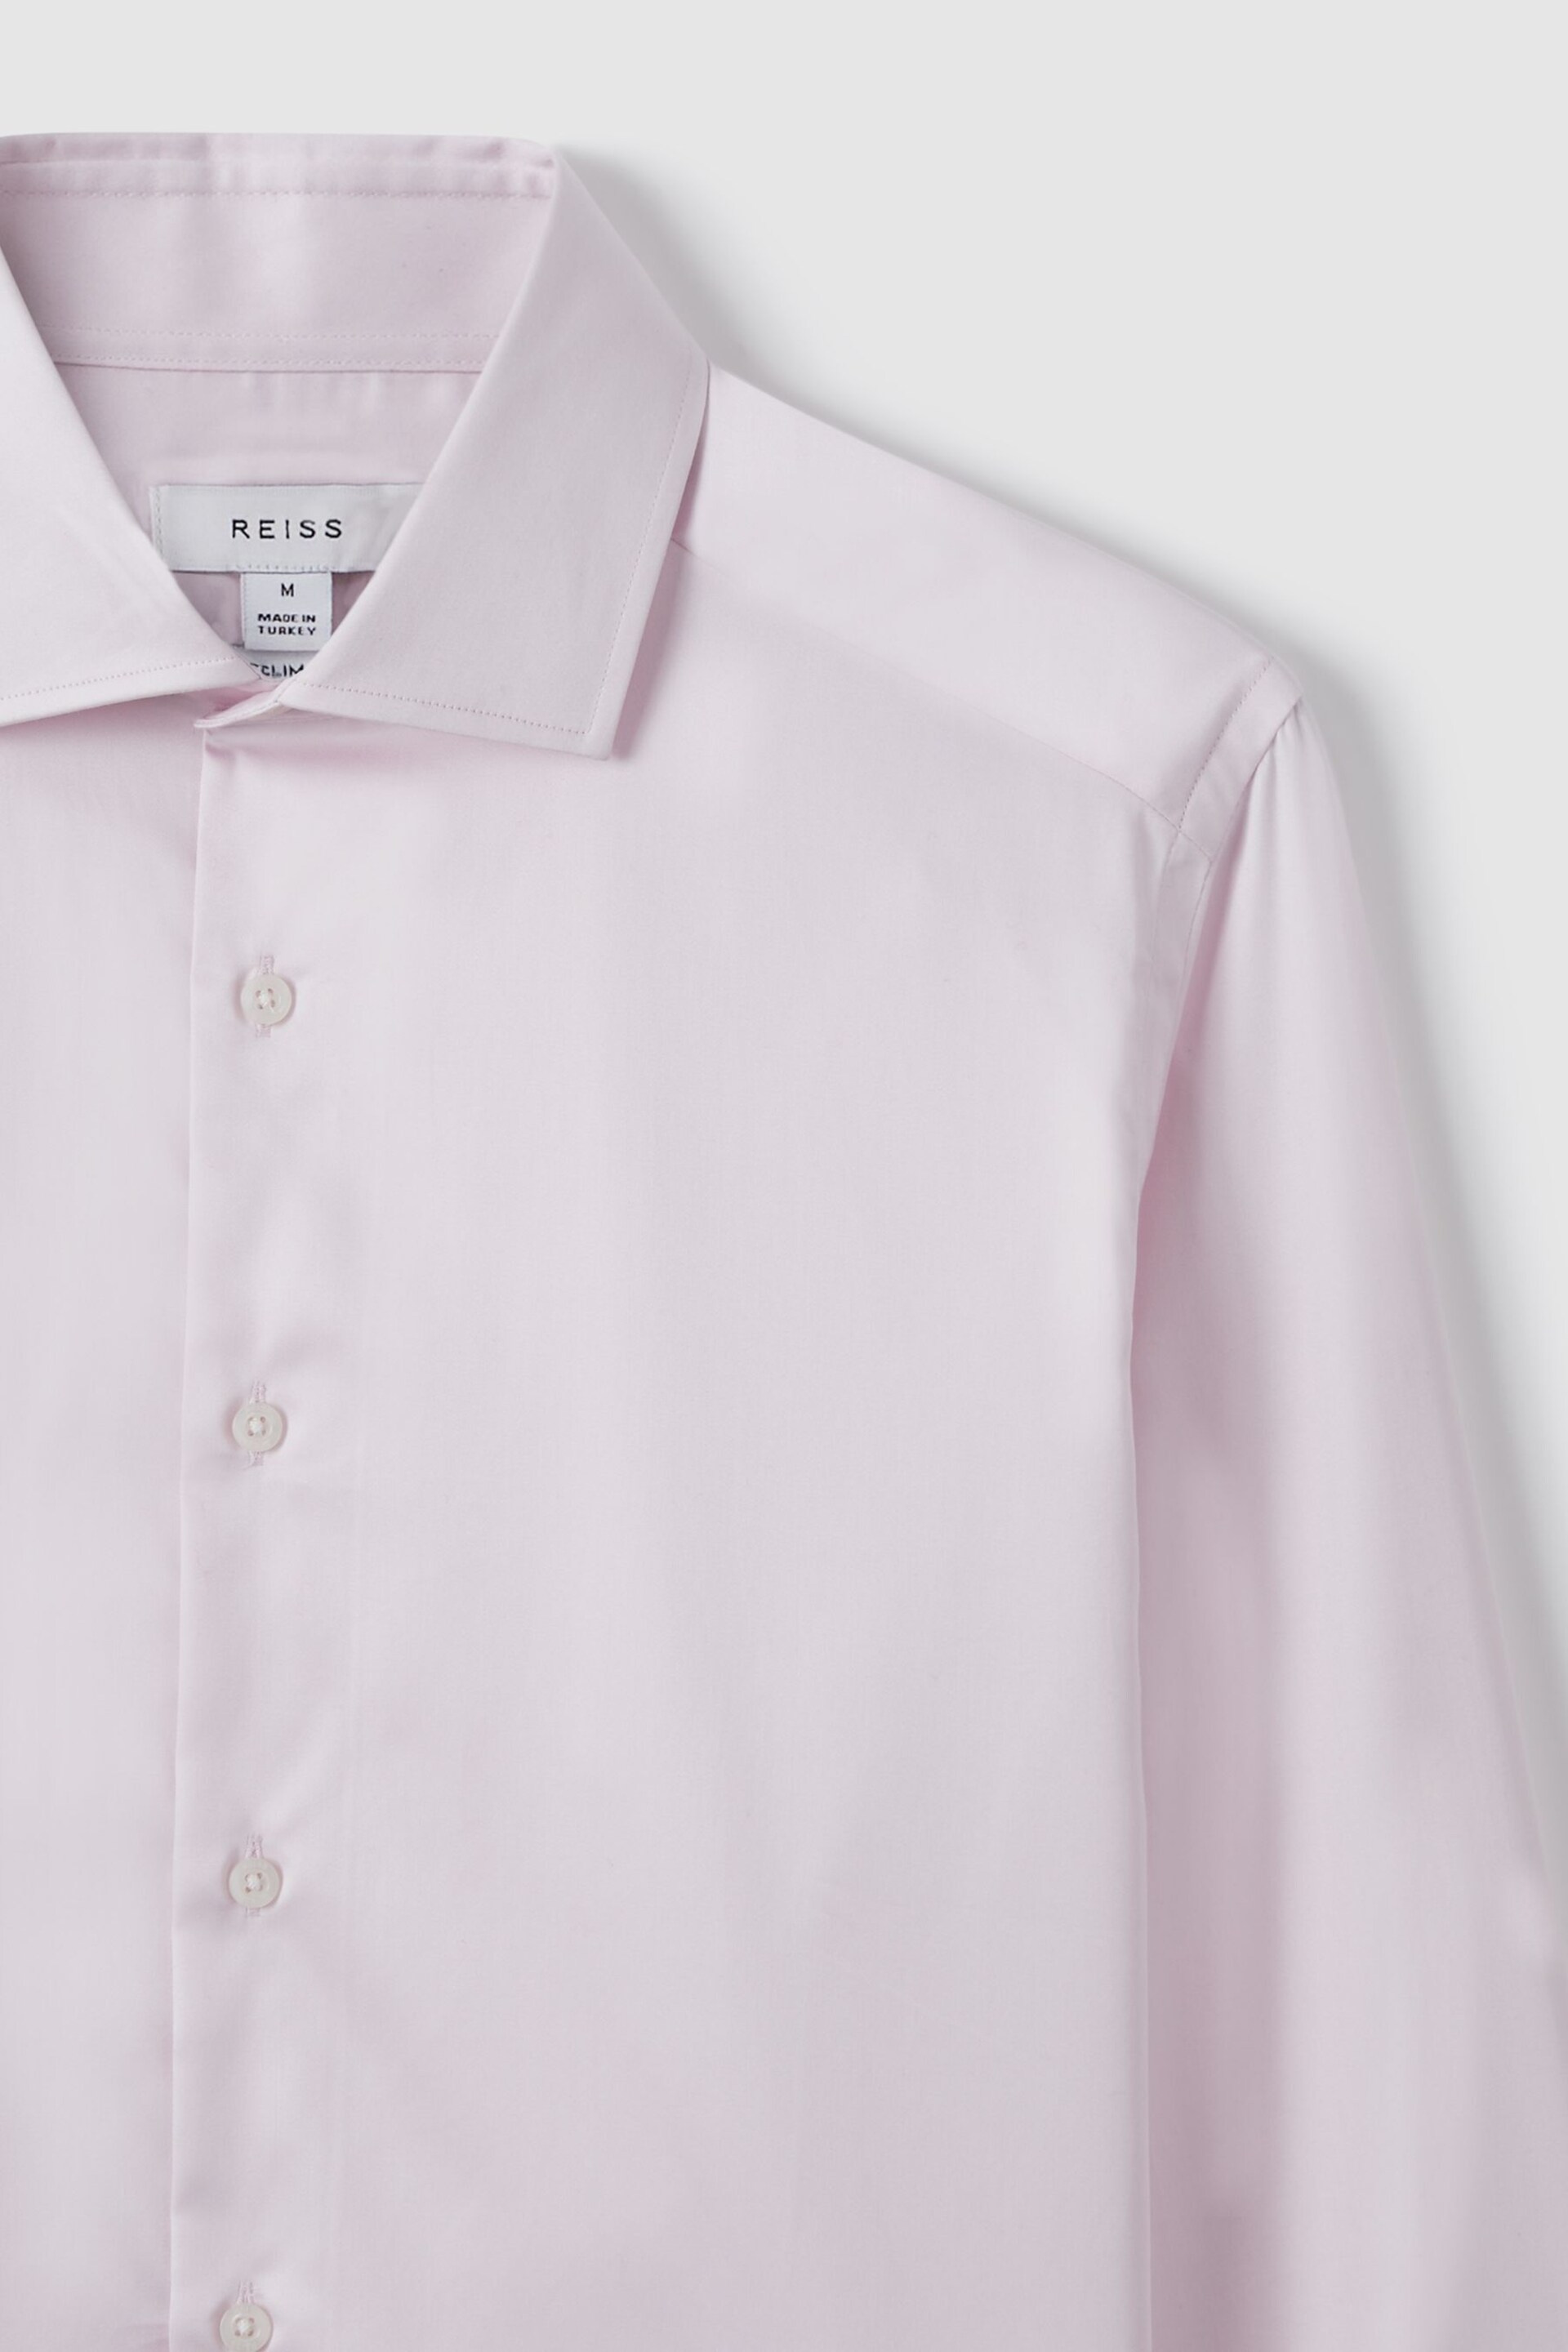 Reiss Pink Remote Slim Fit Cotton Sateen Shirt - Image 5 of 6